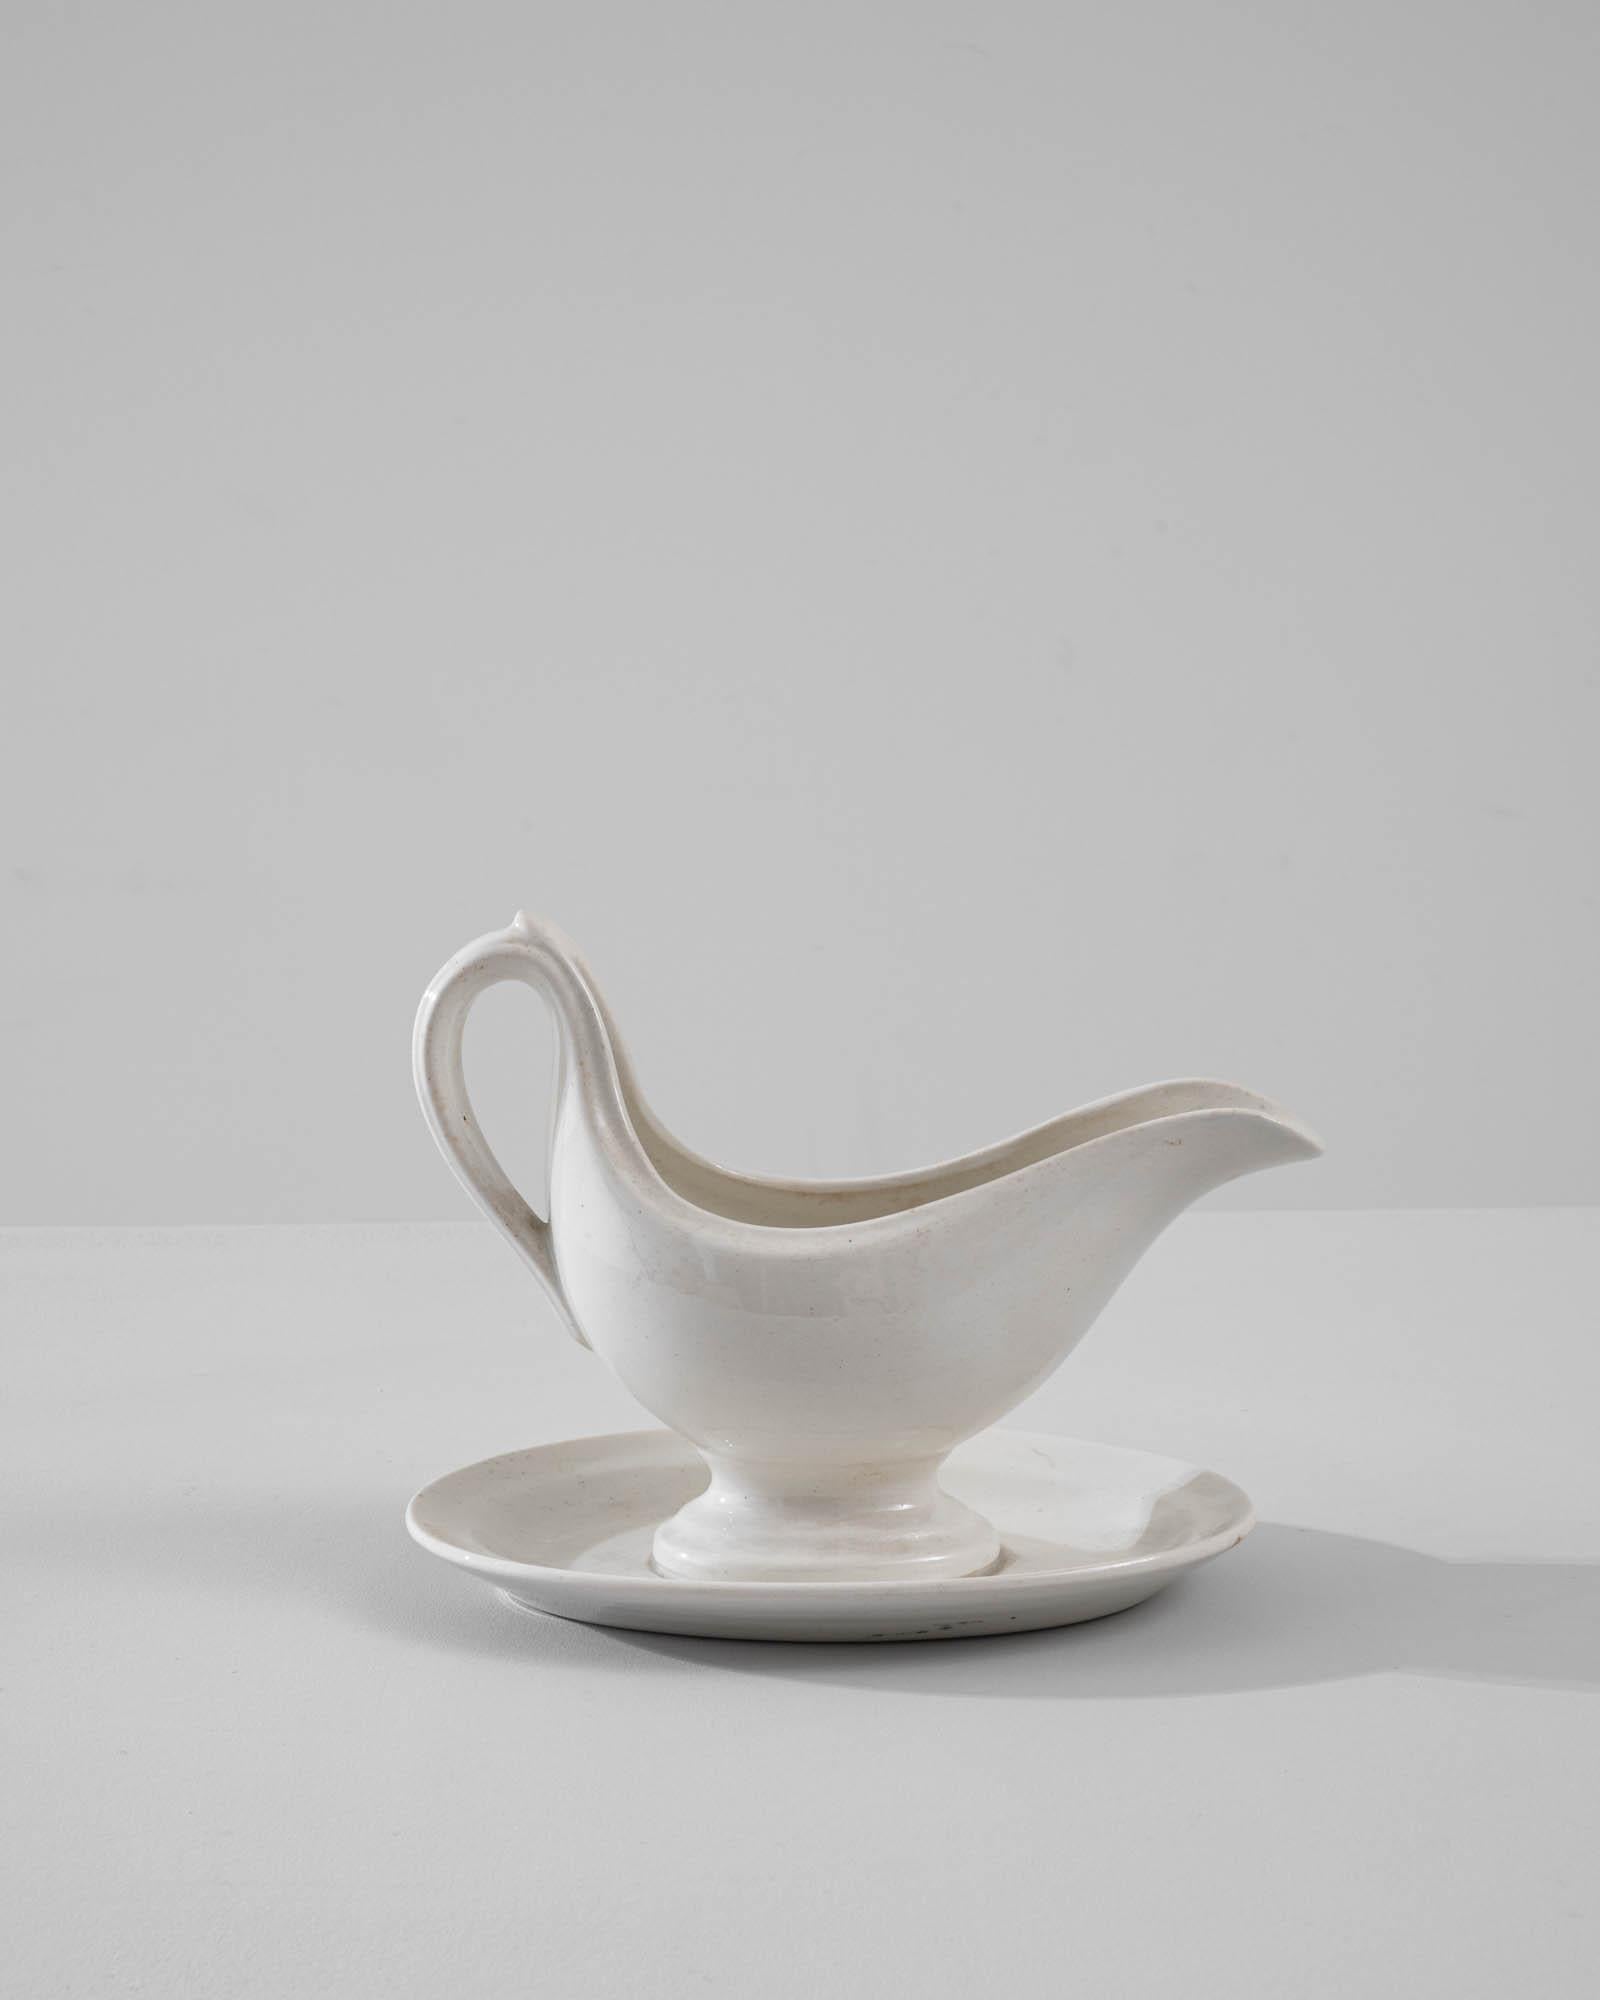 A vintage porcelain sauce boat made in Belgium, circa 1900. White china is finished with a luscious glossy glaze, elevating the superior form and subtle vintage patina of this finely crafted table piece. The delicate contour and out-turned lip of